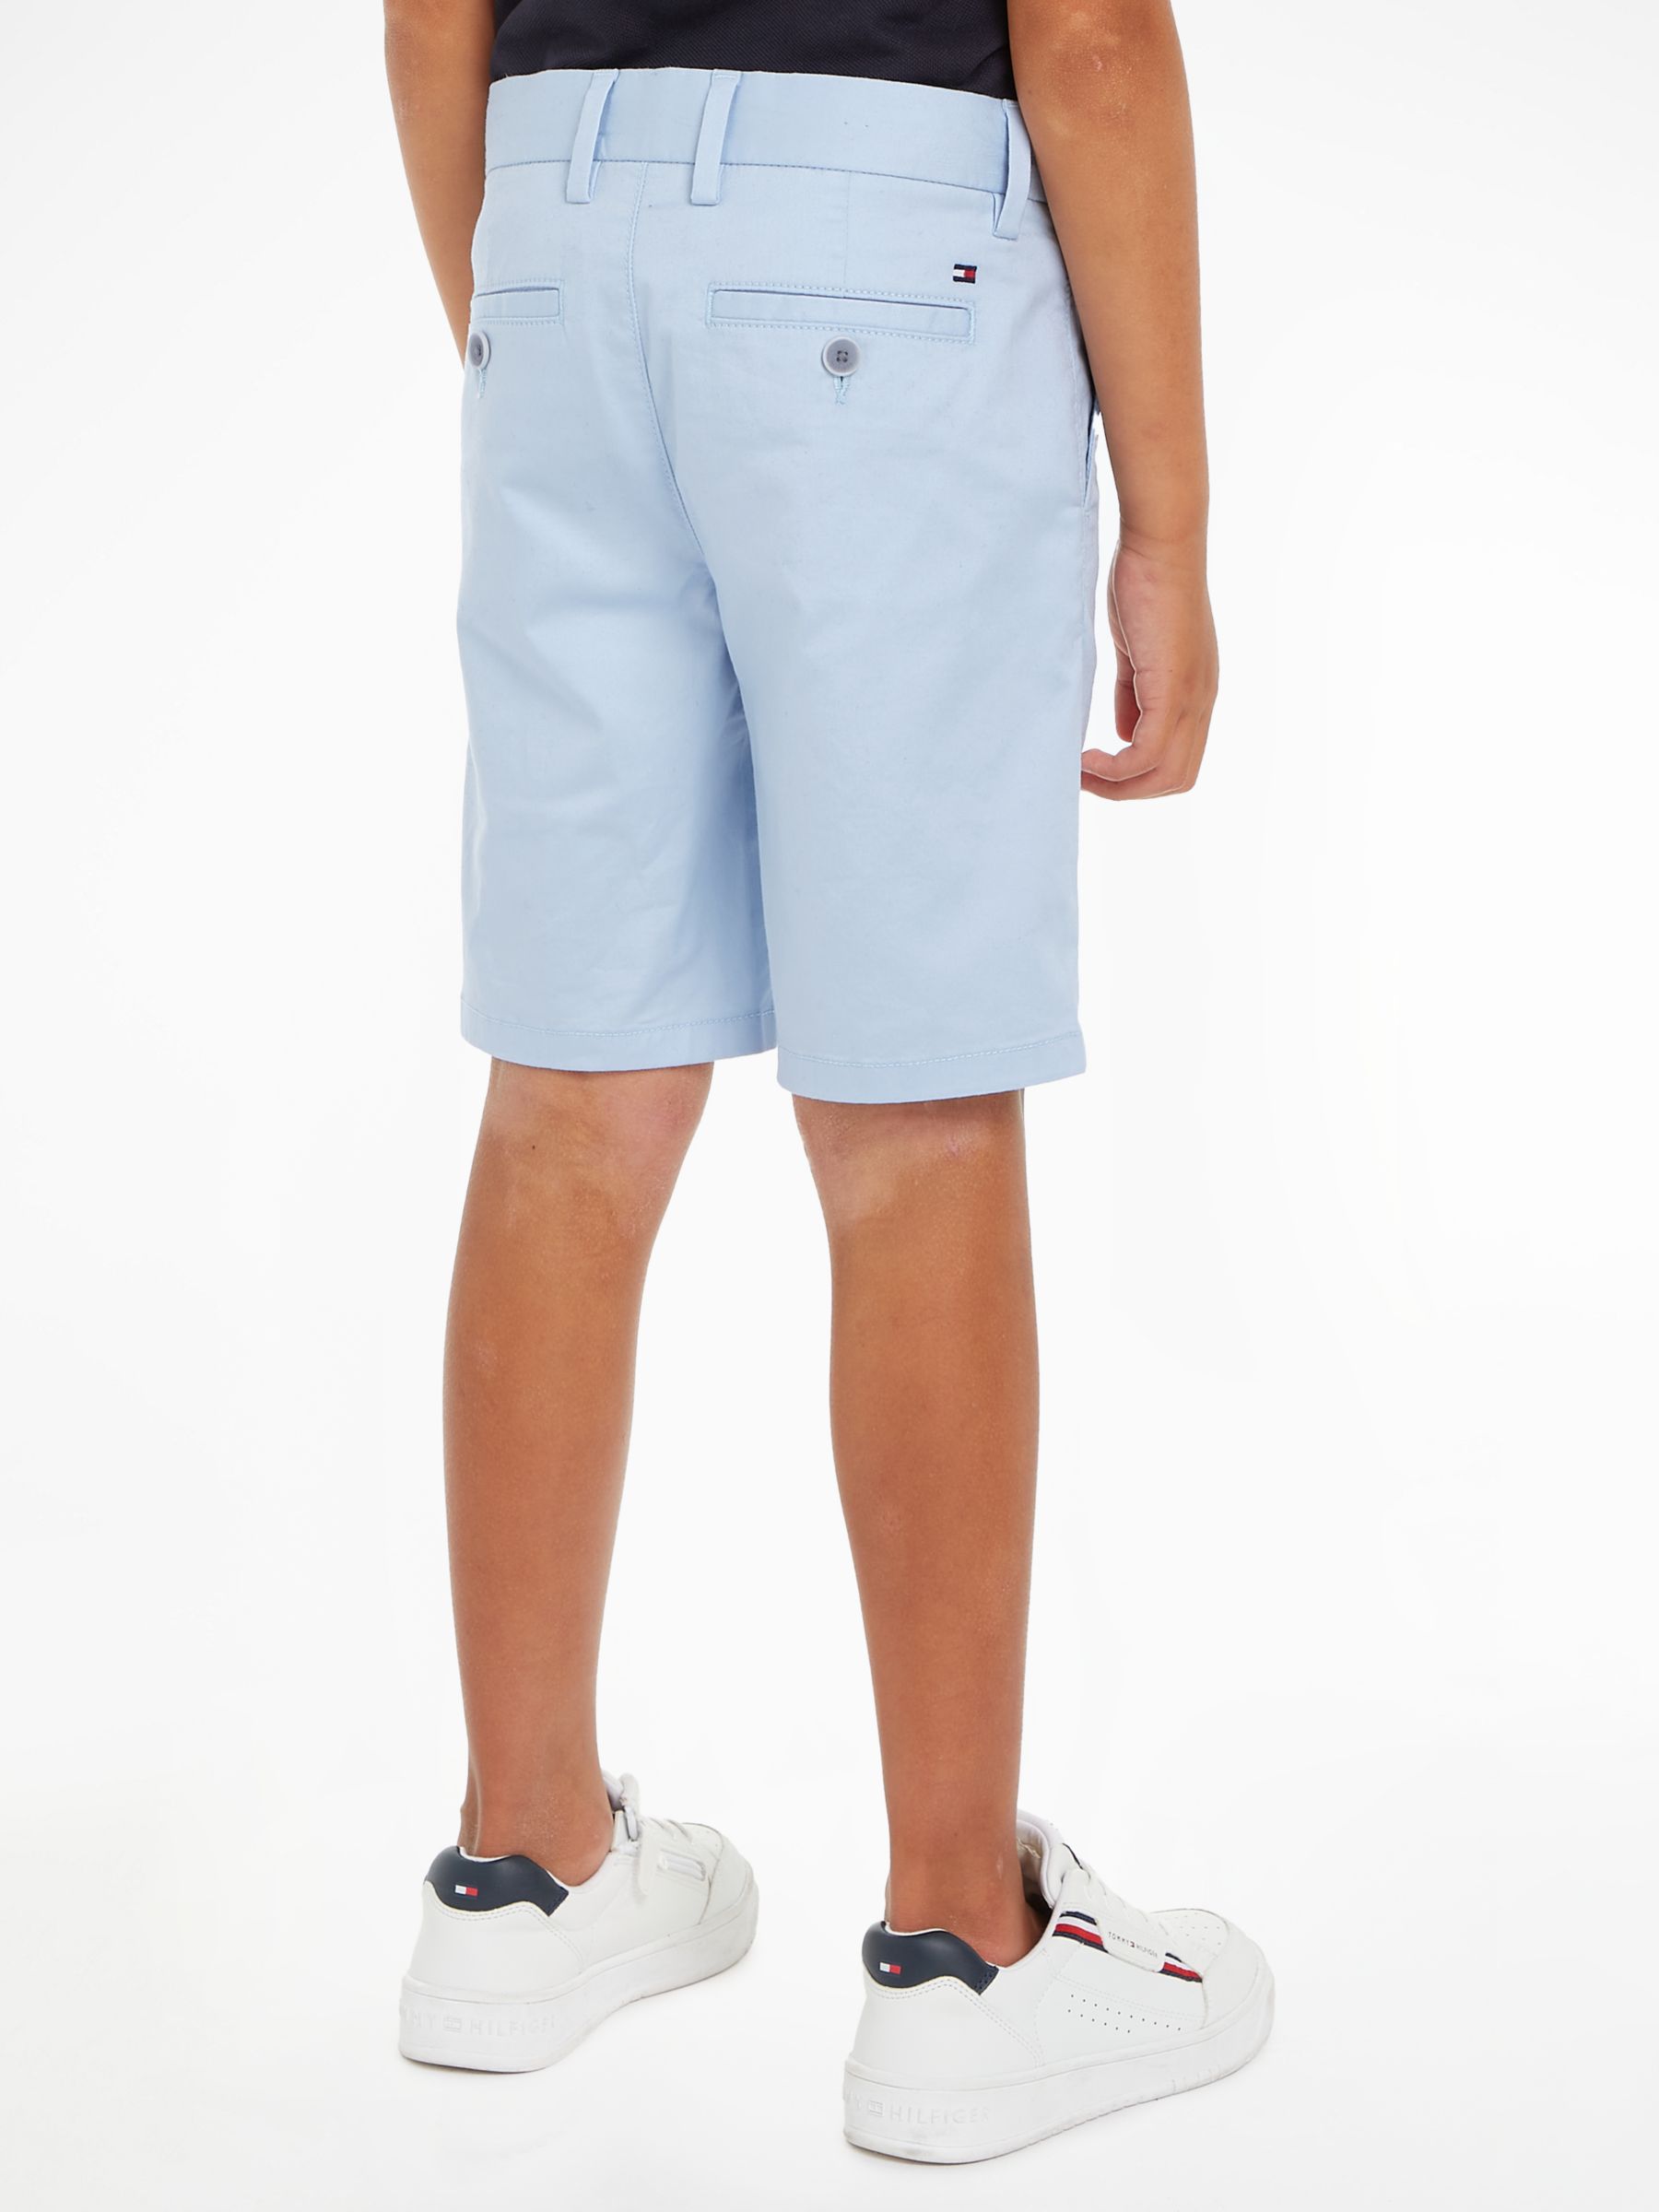 Tommy Hilfiger Kids' 1985 Chino Shorts, Breezy Blue, 10 years